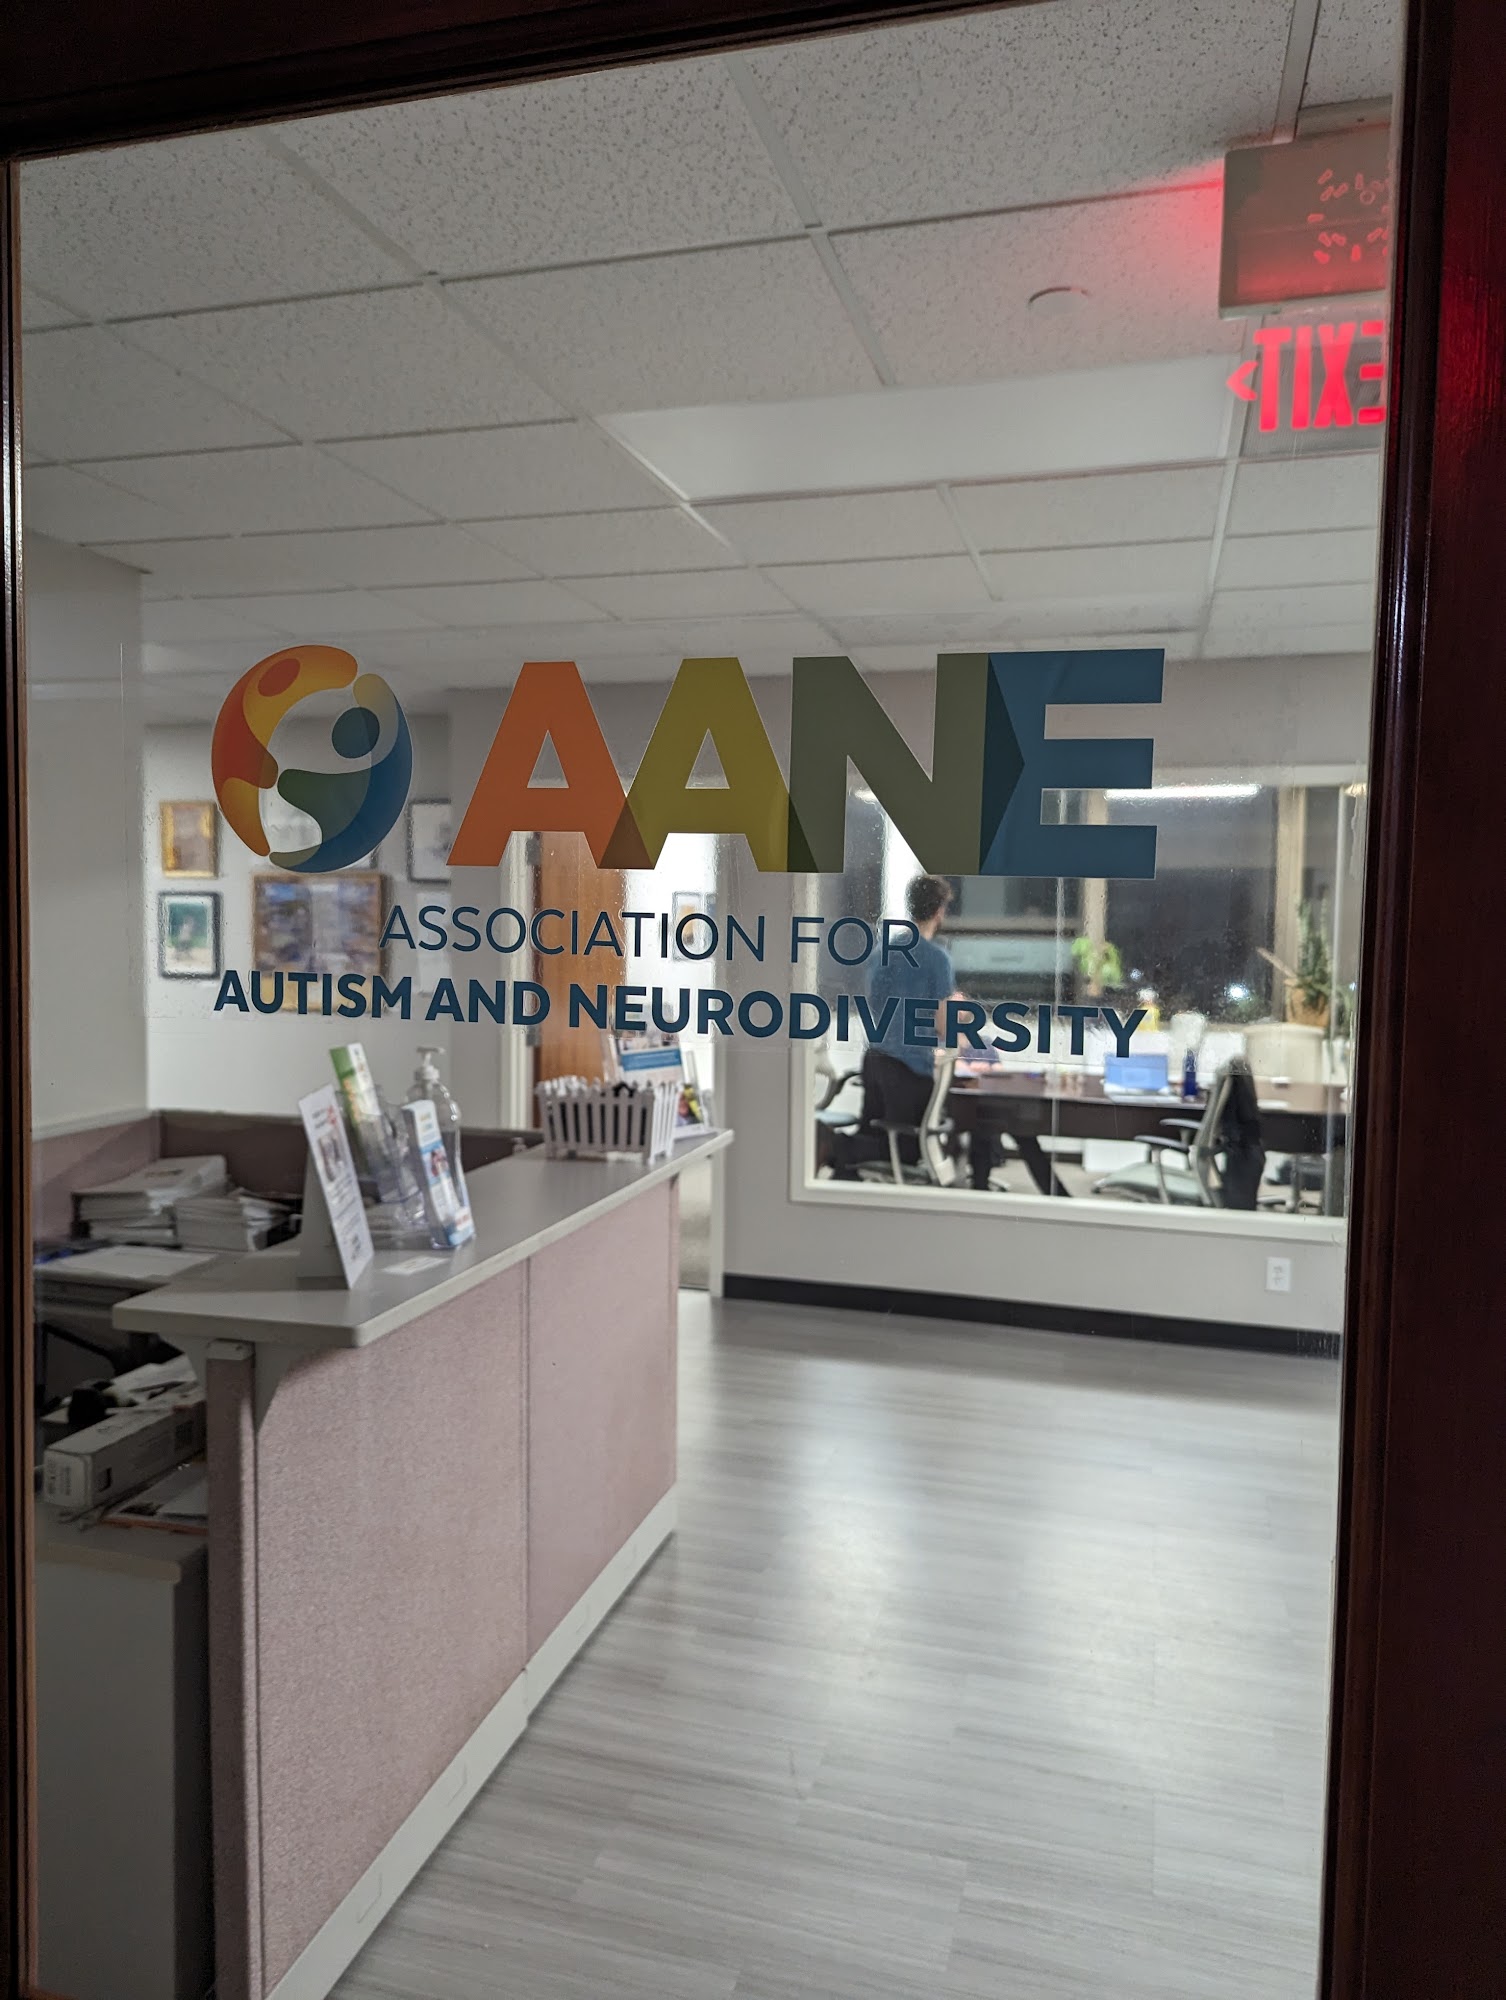 AANE (Association for Autism and Neurodiversity)